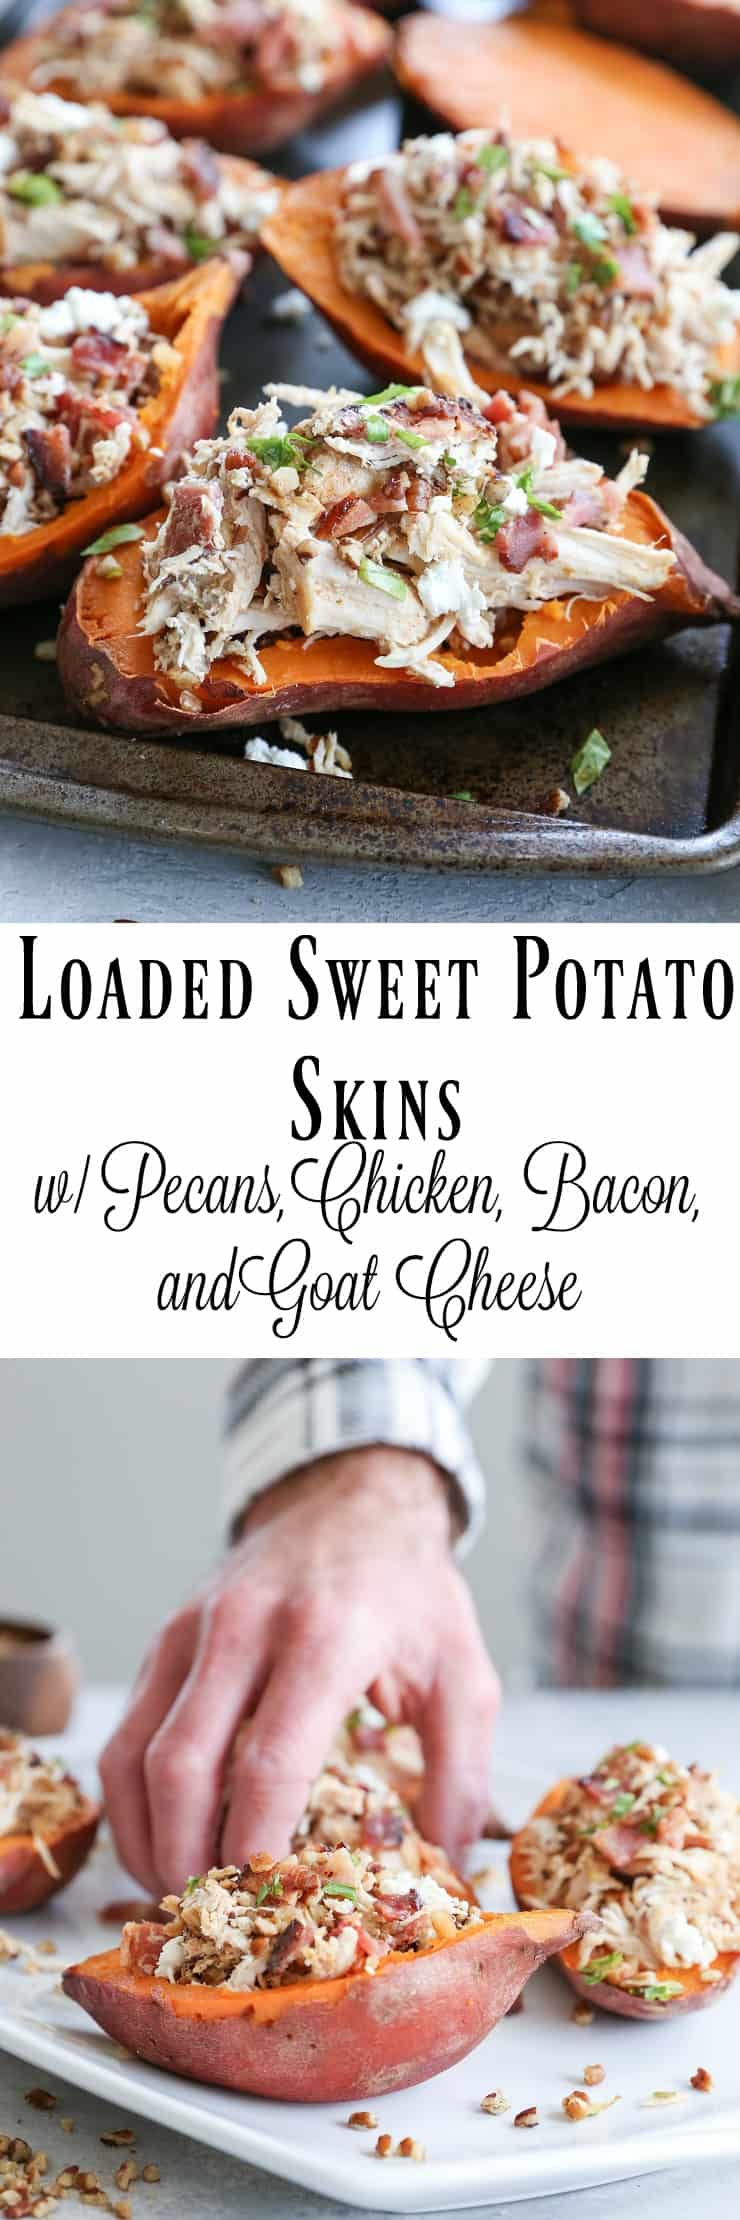 Loaded Sweet Potato Skins with Pecans, Chicken, Bacon, and Goat Cheese - a healthier take on the classic appetizer